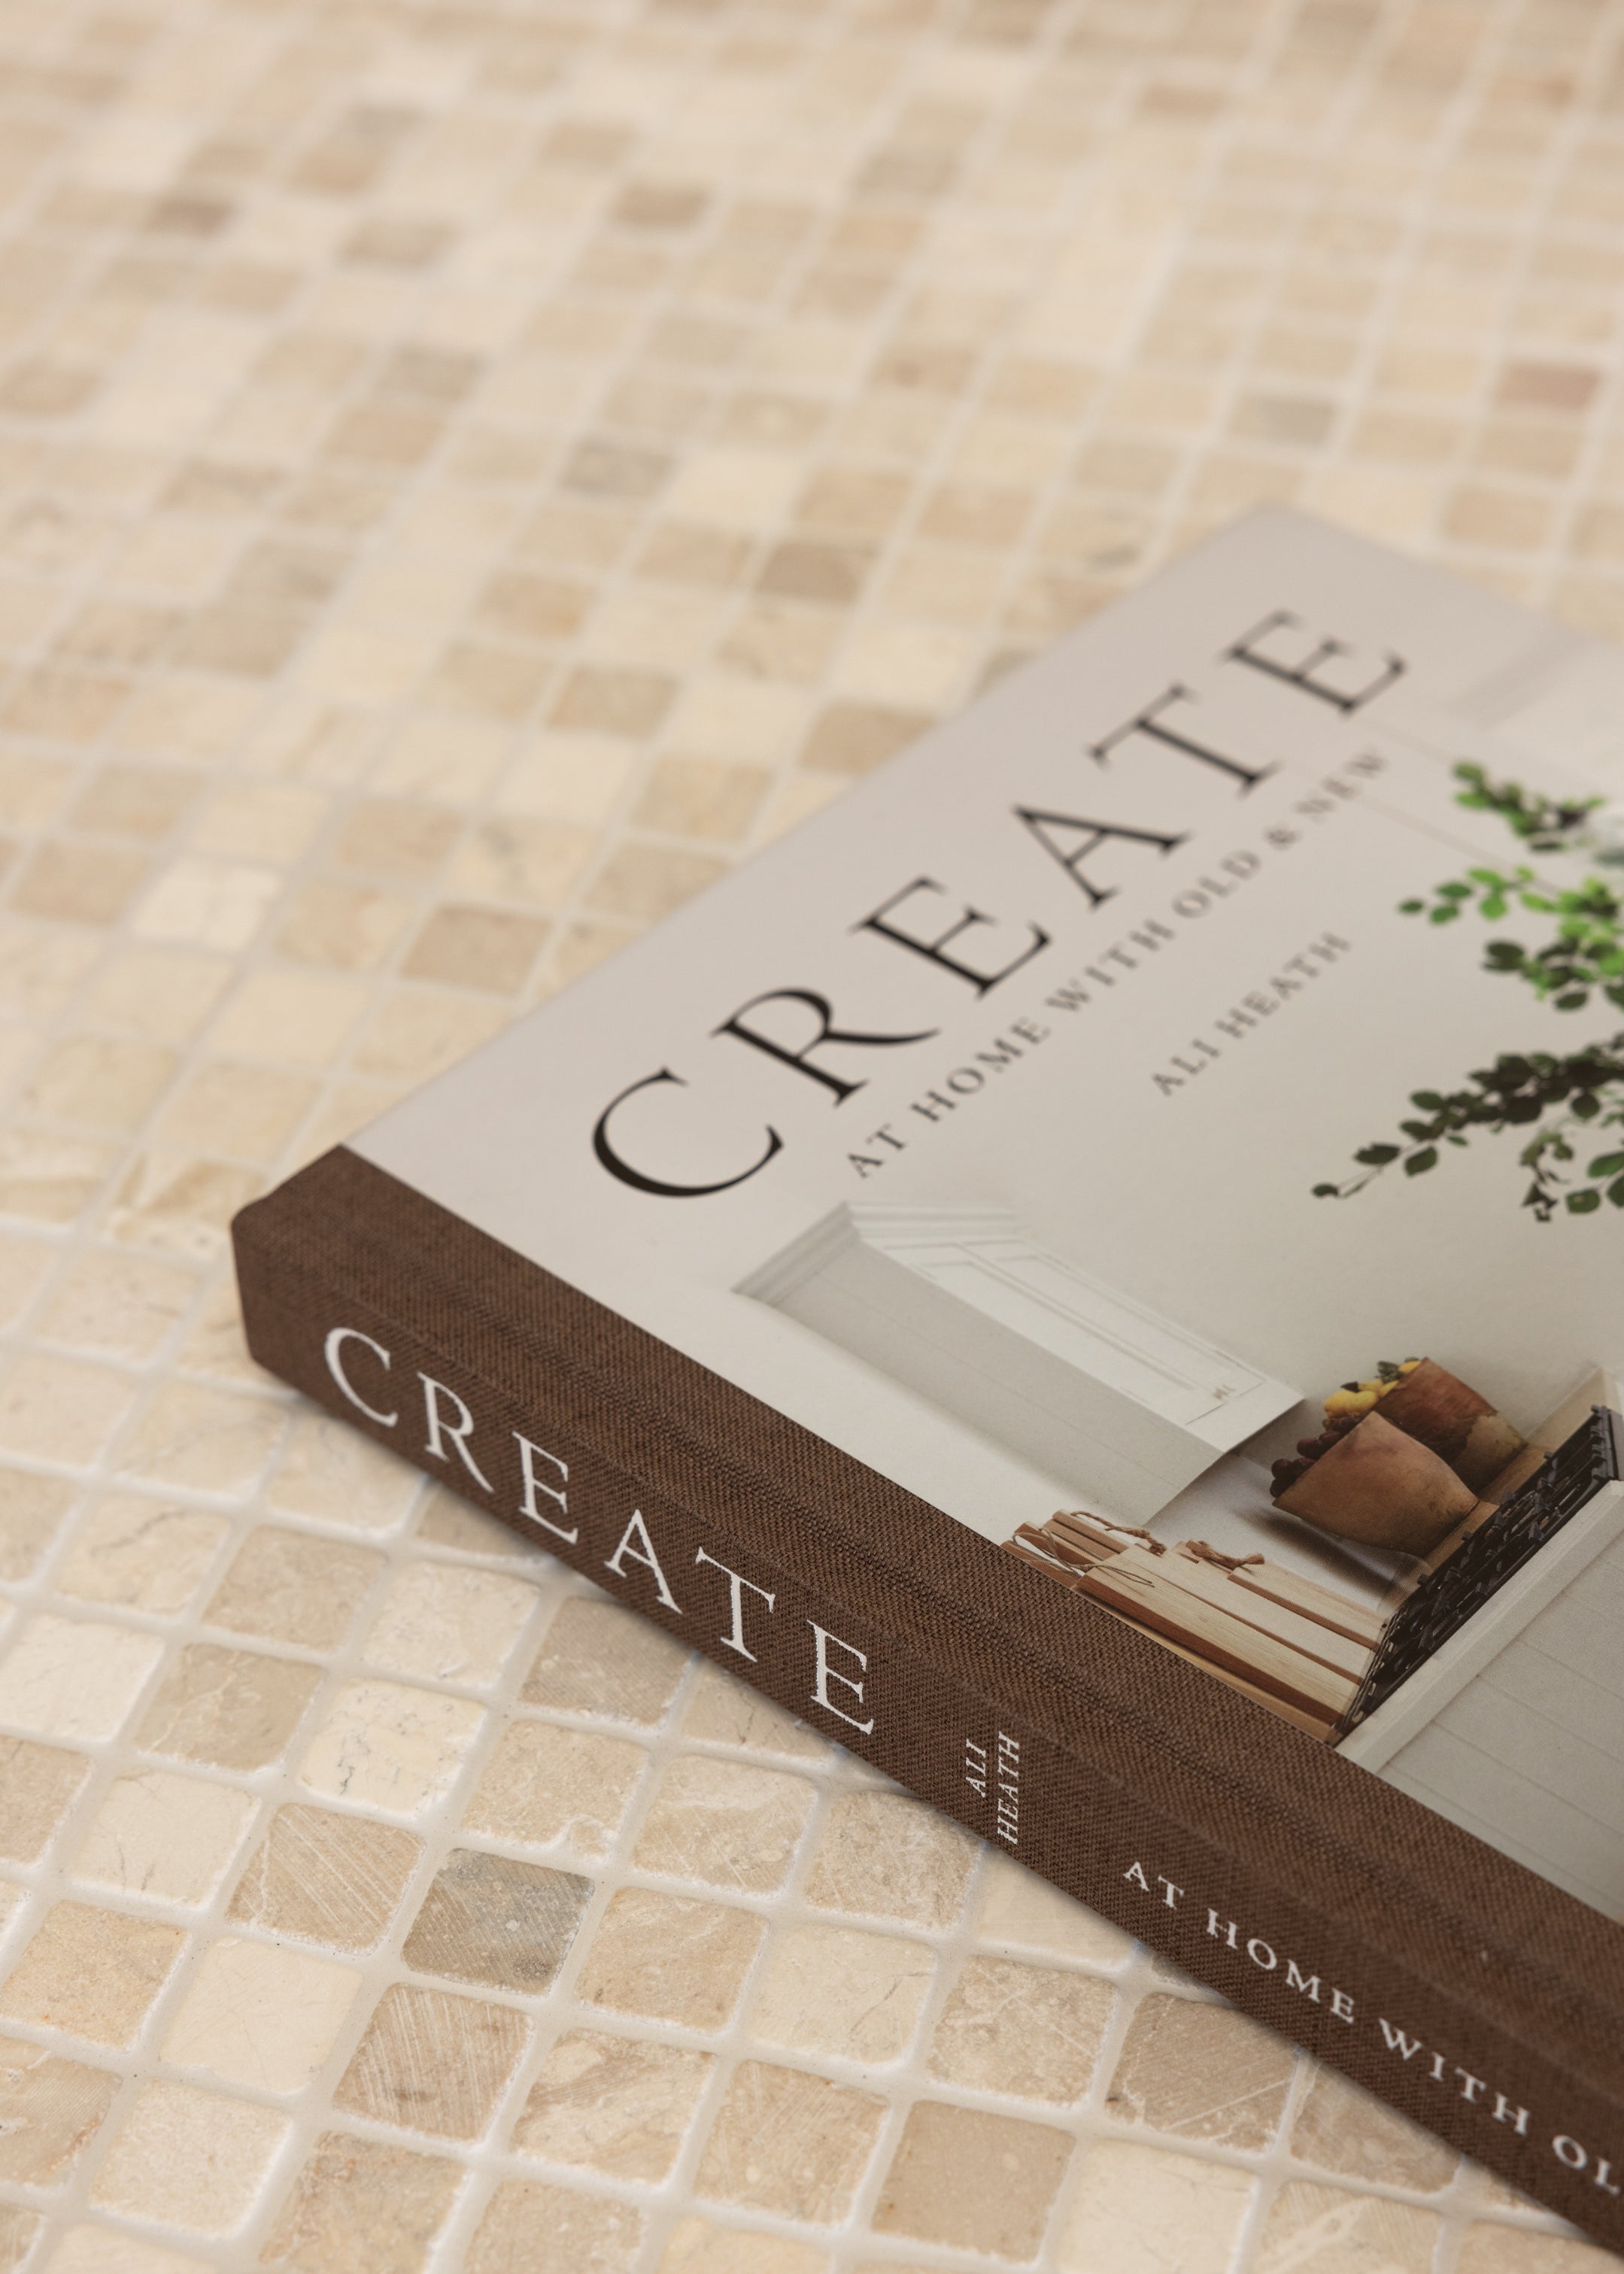 Create: At Home With Old & New